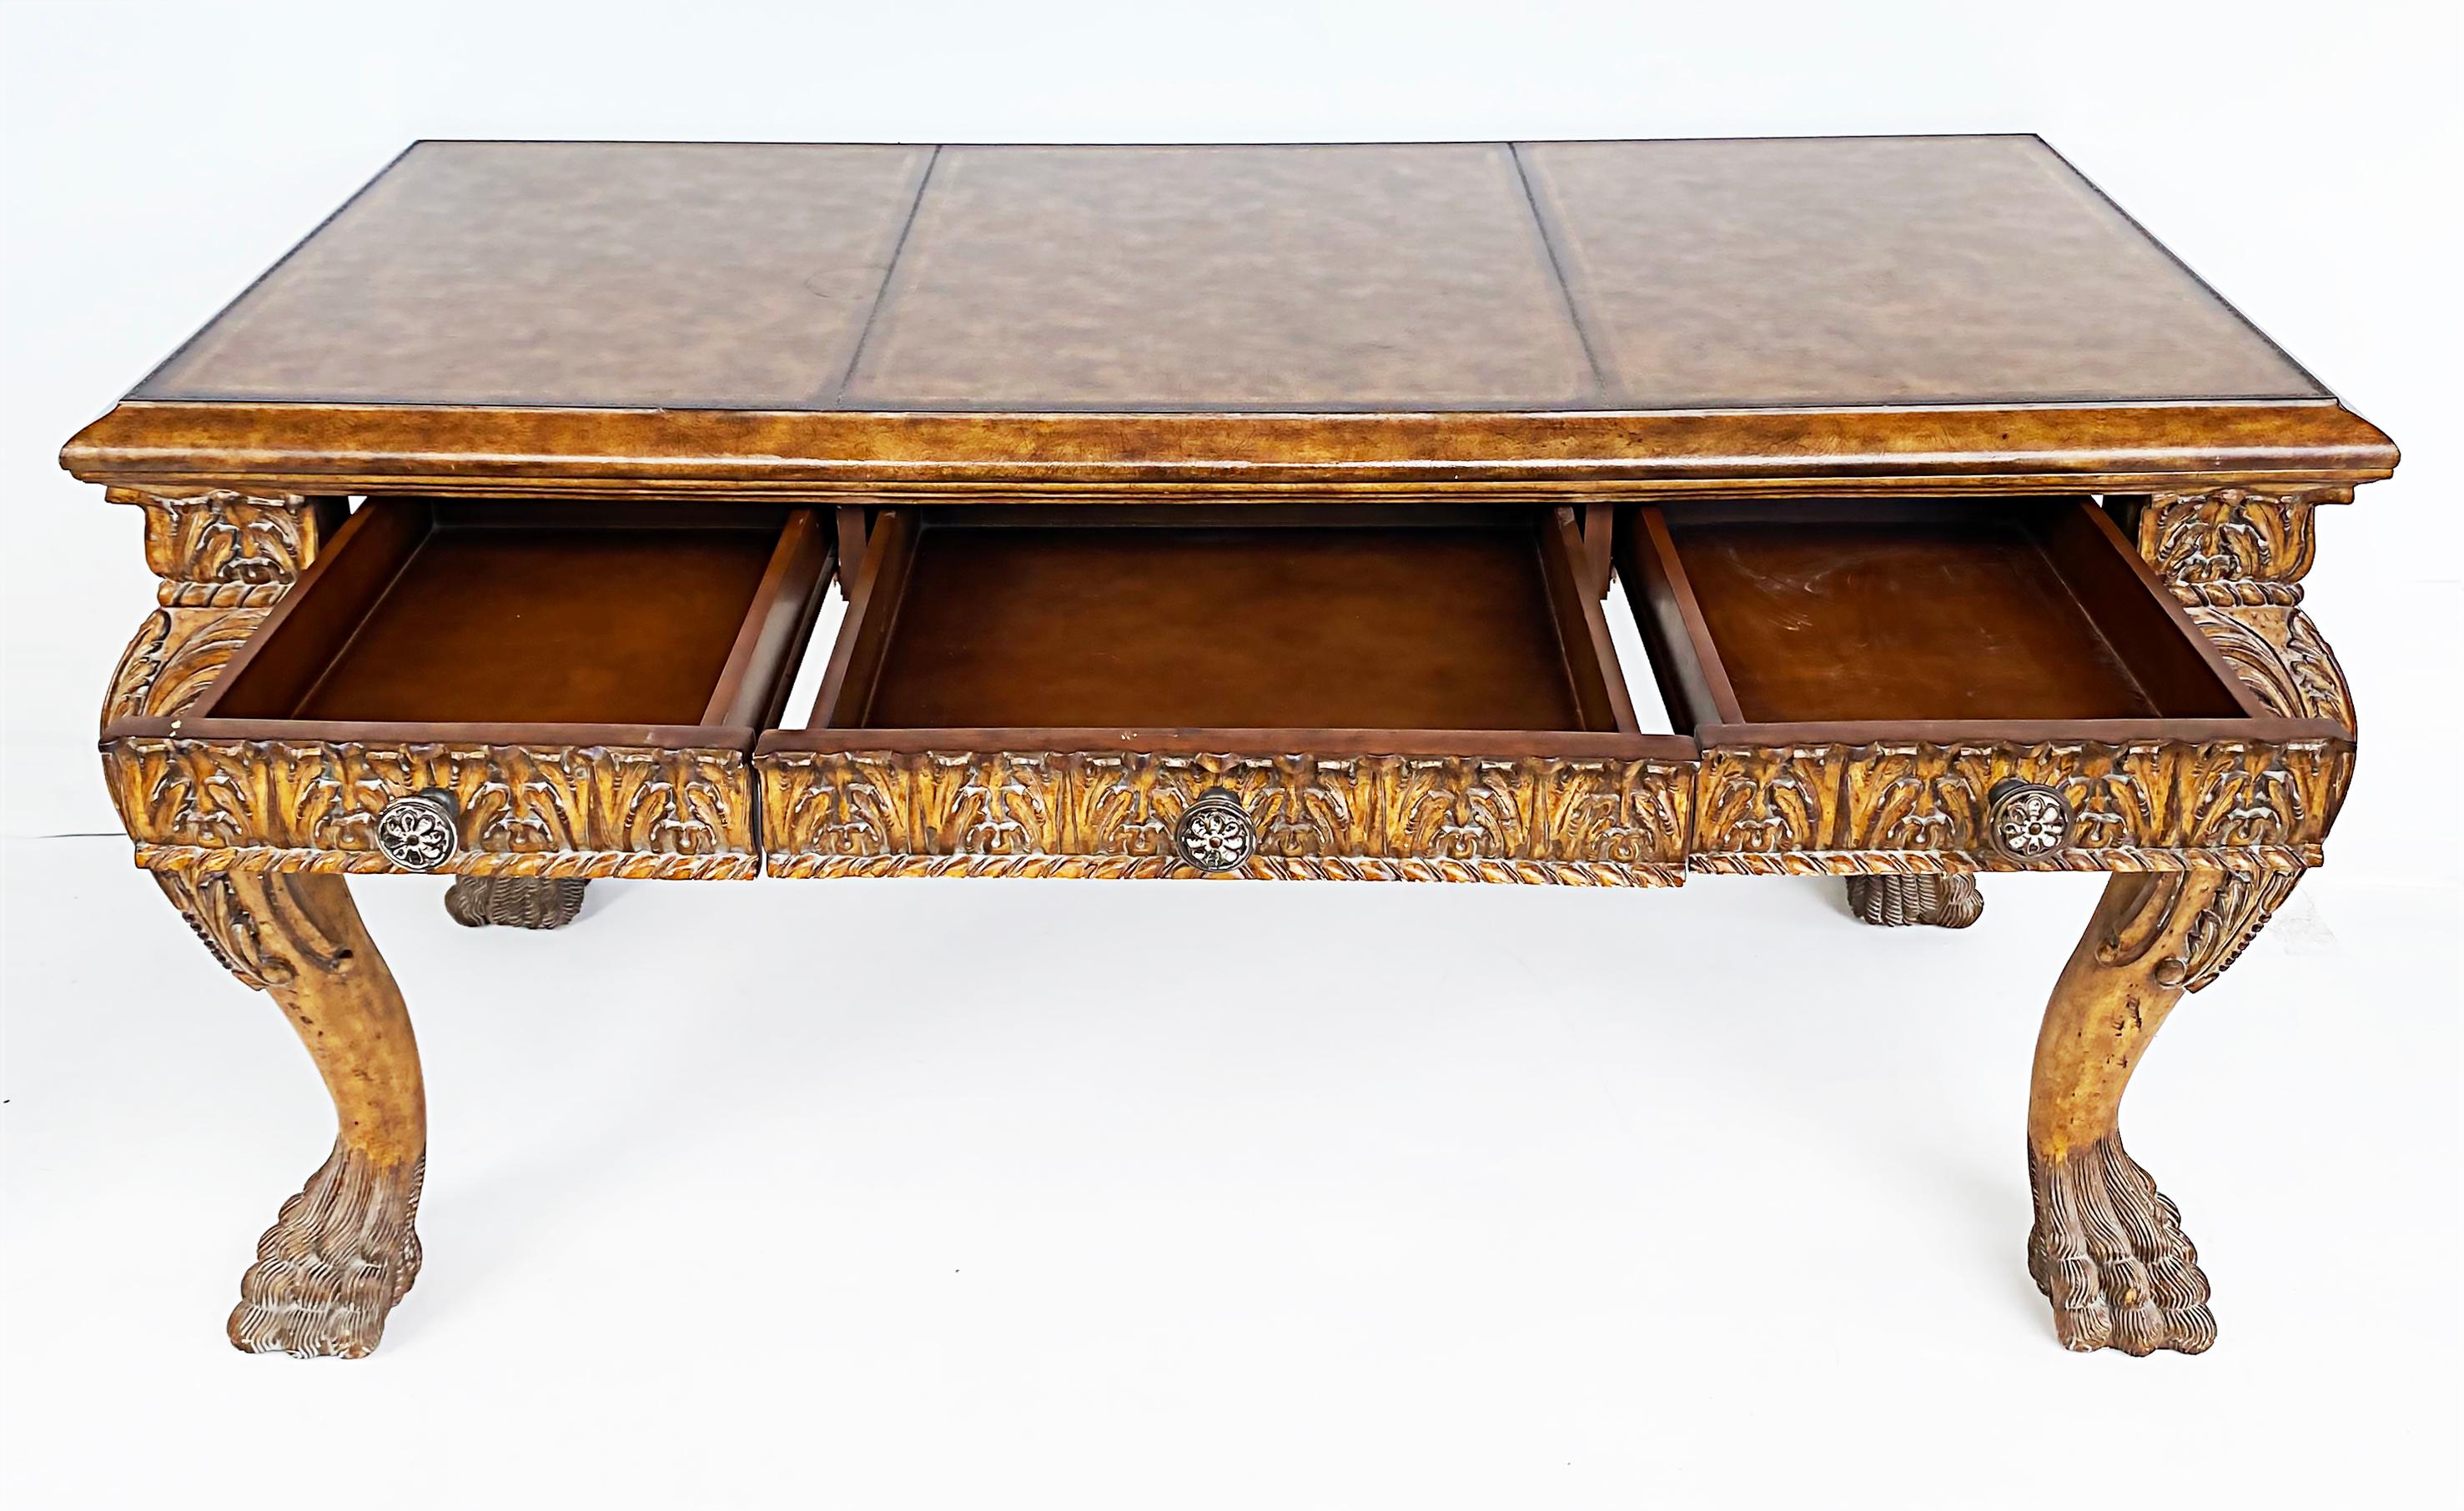 Carved Gilt Leather Writing Desk with Hairy Paw Feet, Maitland-Smith Attributed 1